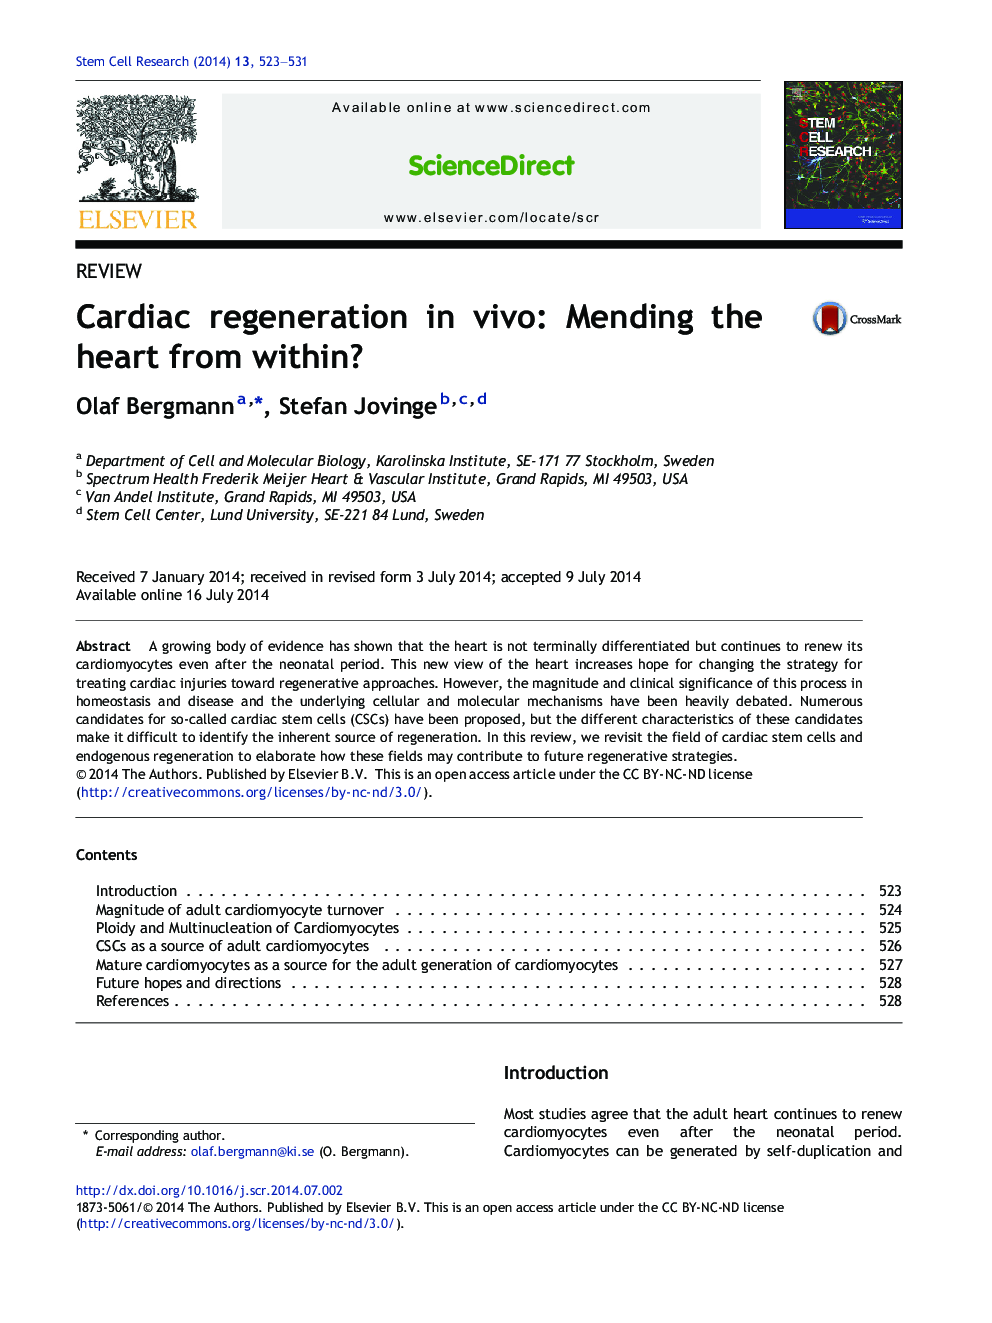 Cardiac regeneration in vivo: Mending the heart from within?